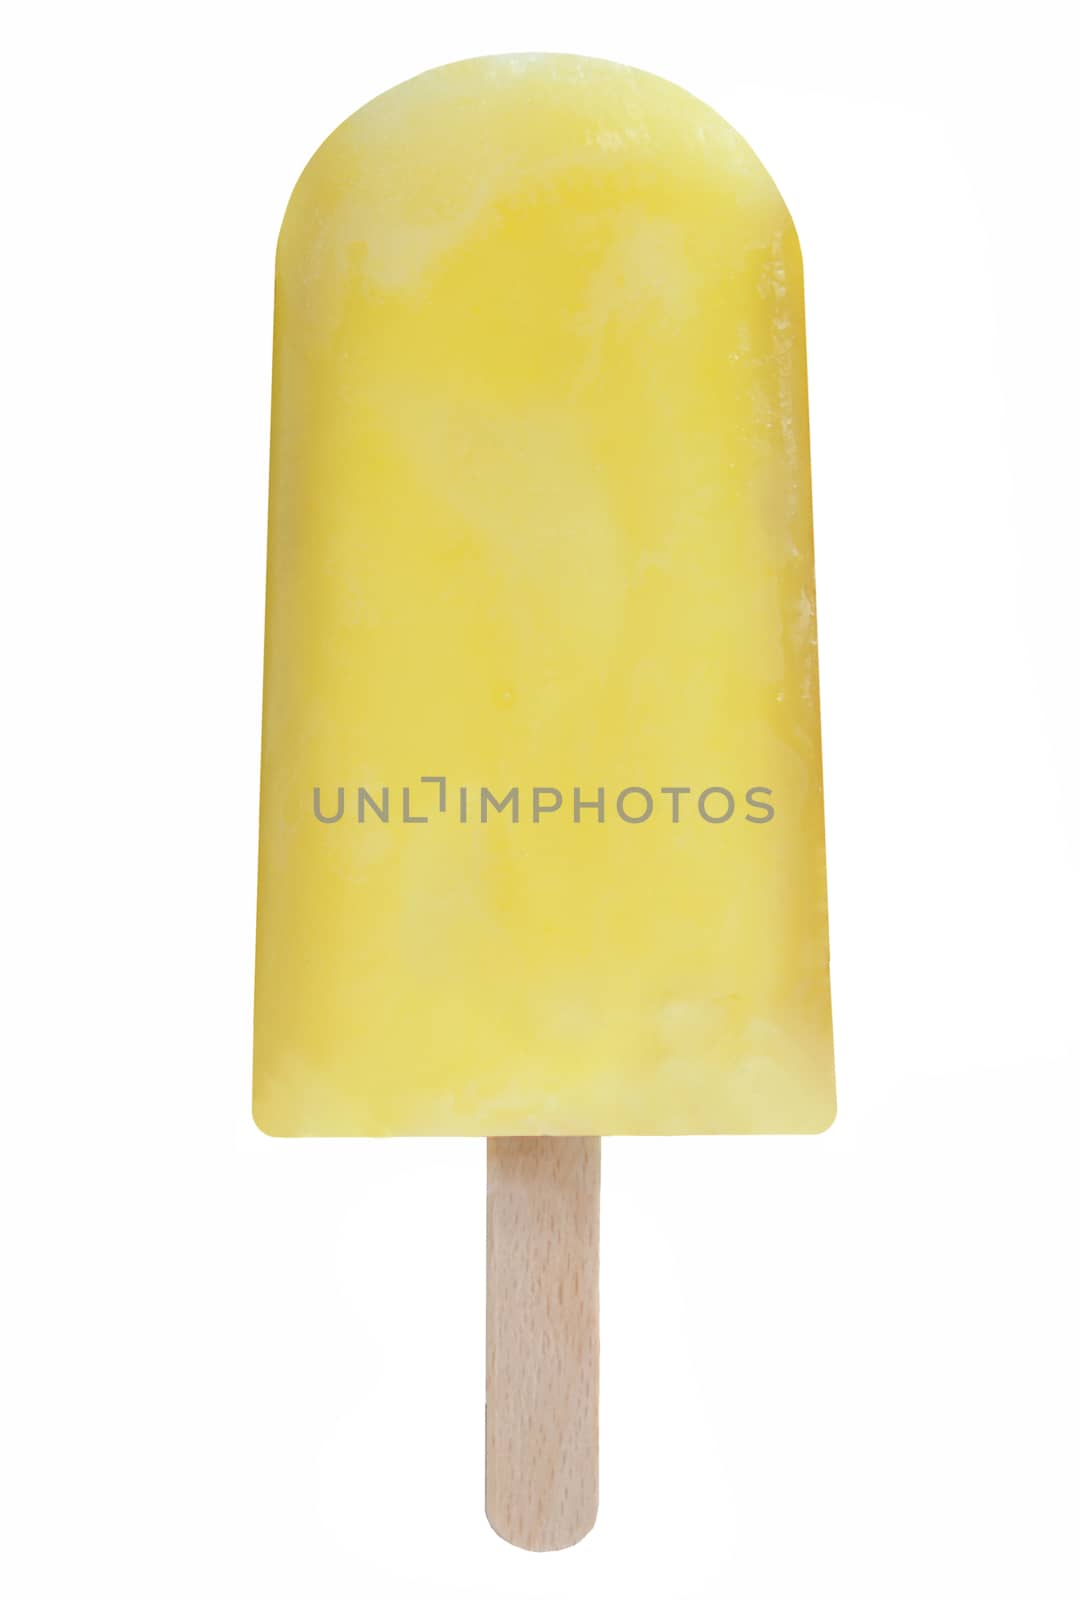 Yellow ice lolly over a white background